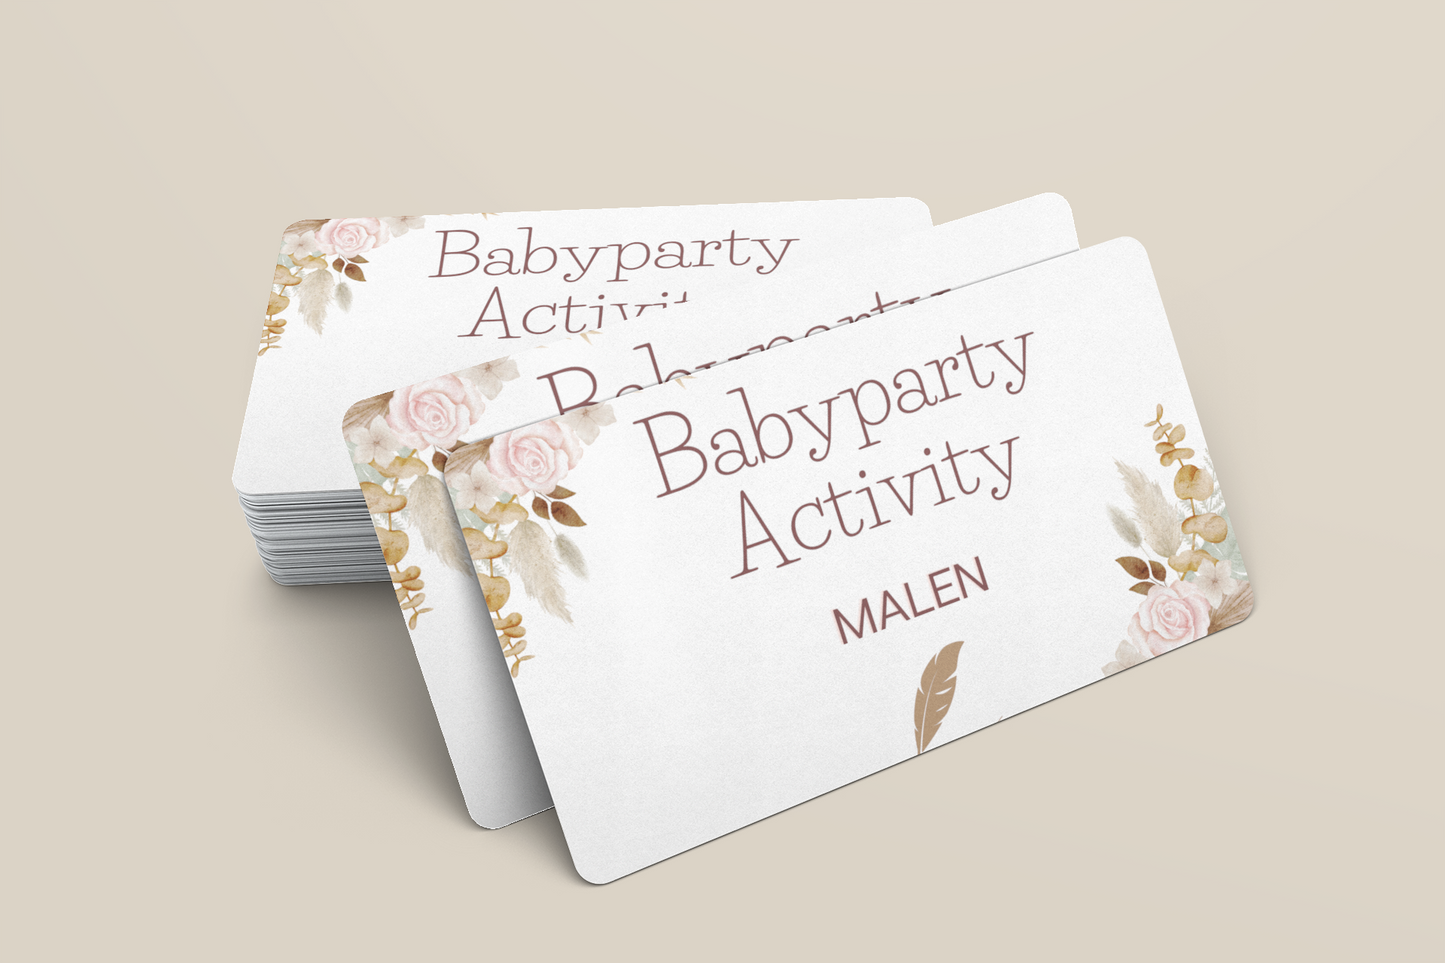 Babyparty Spiele - Activity / Scharade